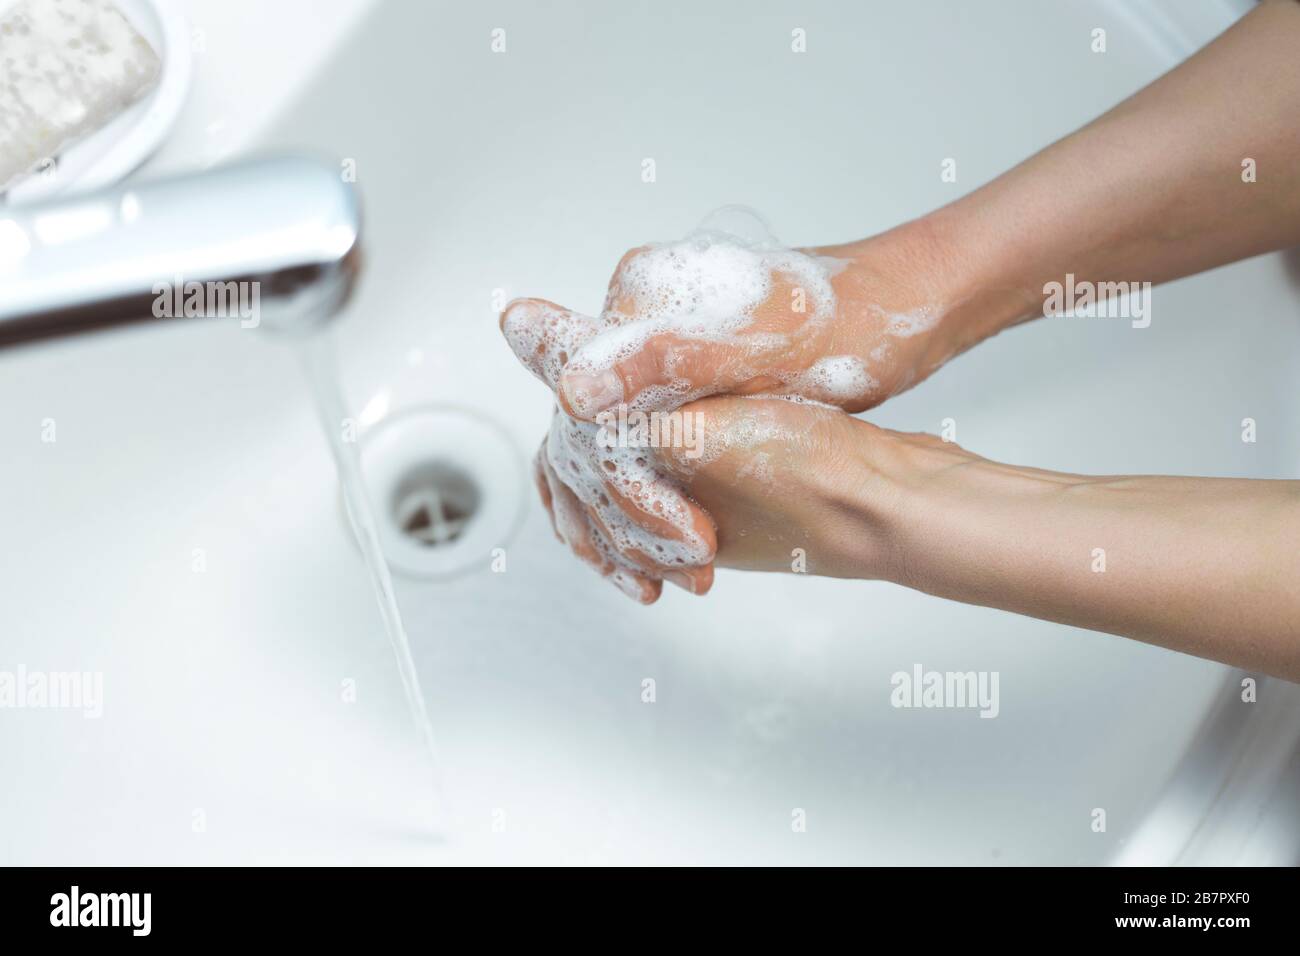 Hand washing with soap. Hygiene concept. Stock Photo